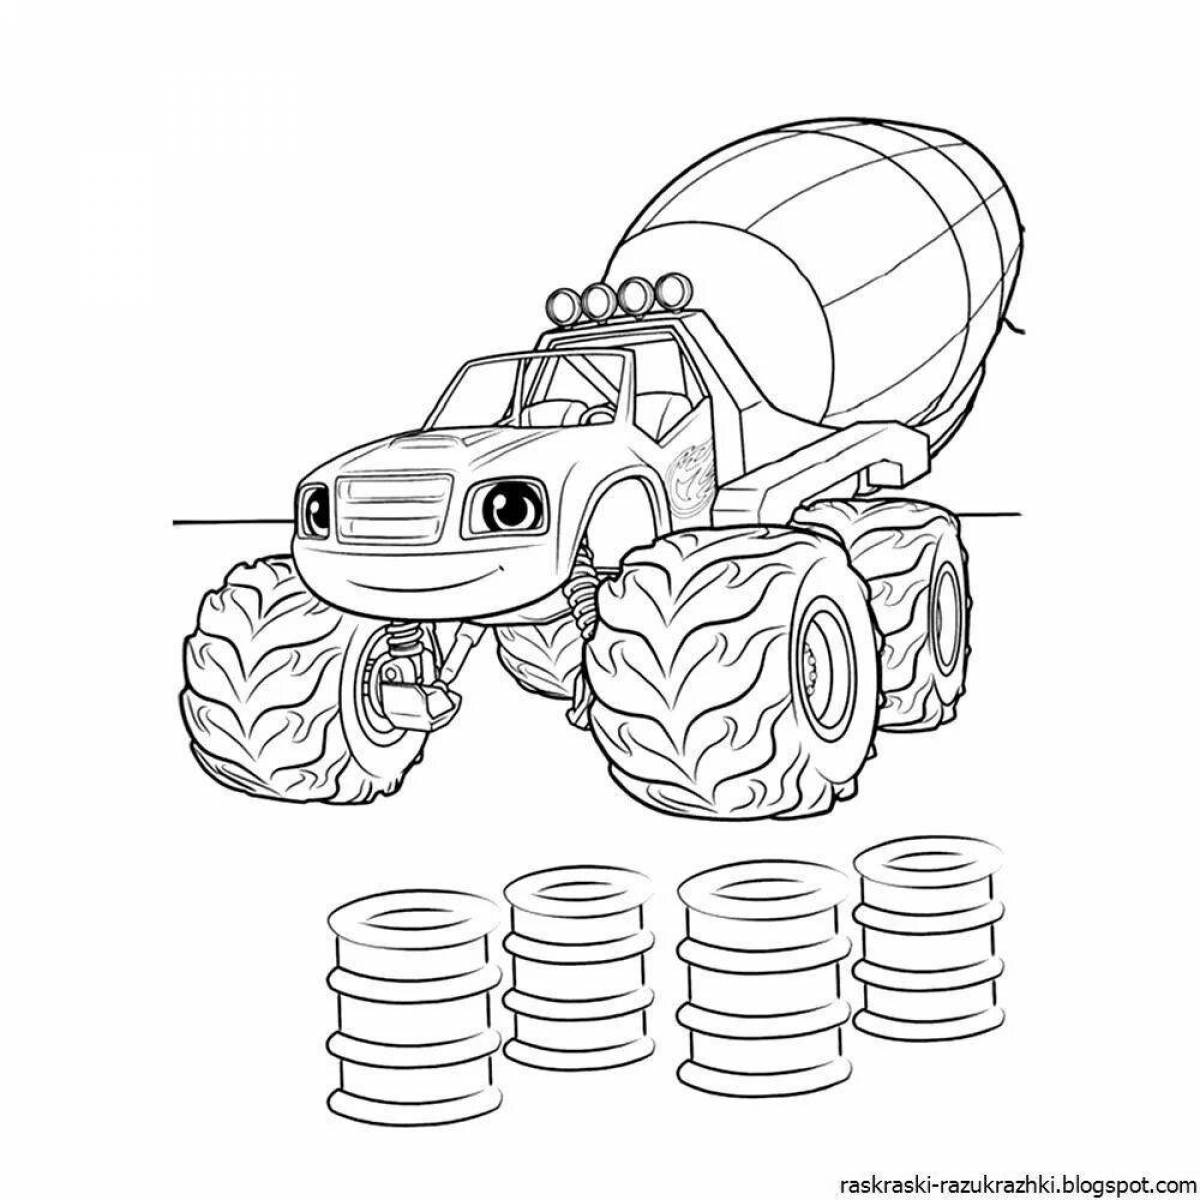 Colorful flash machine coloring page